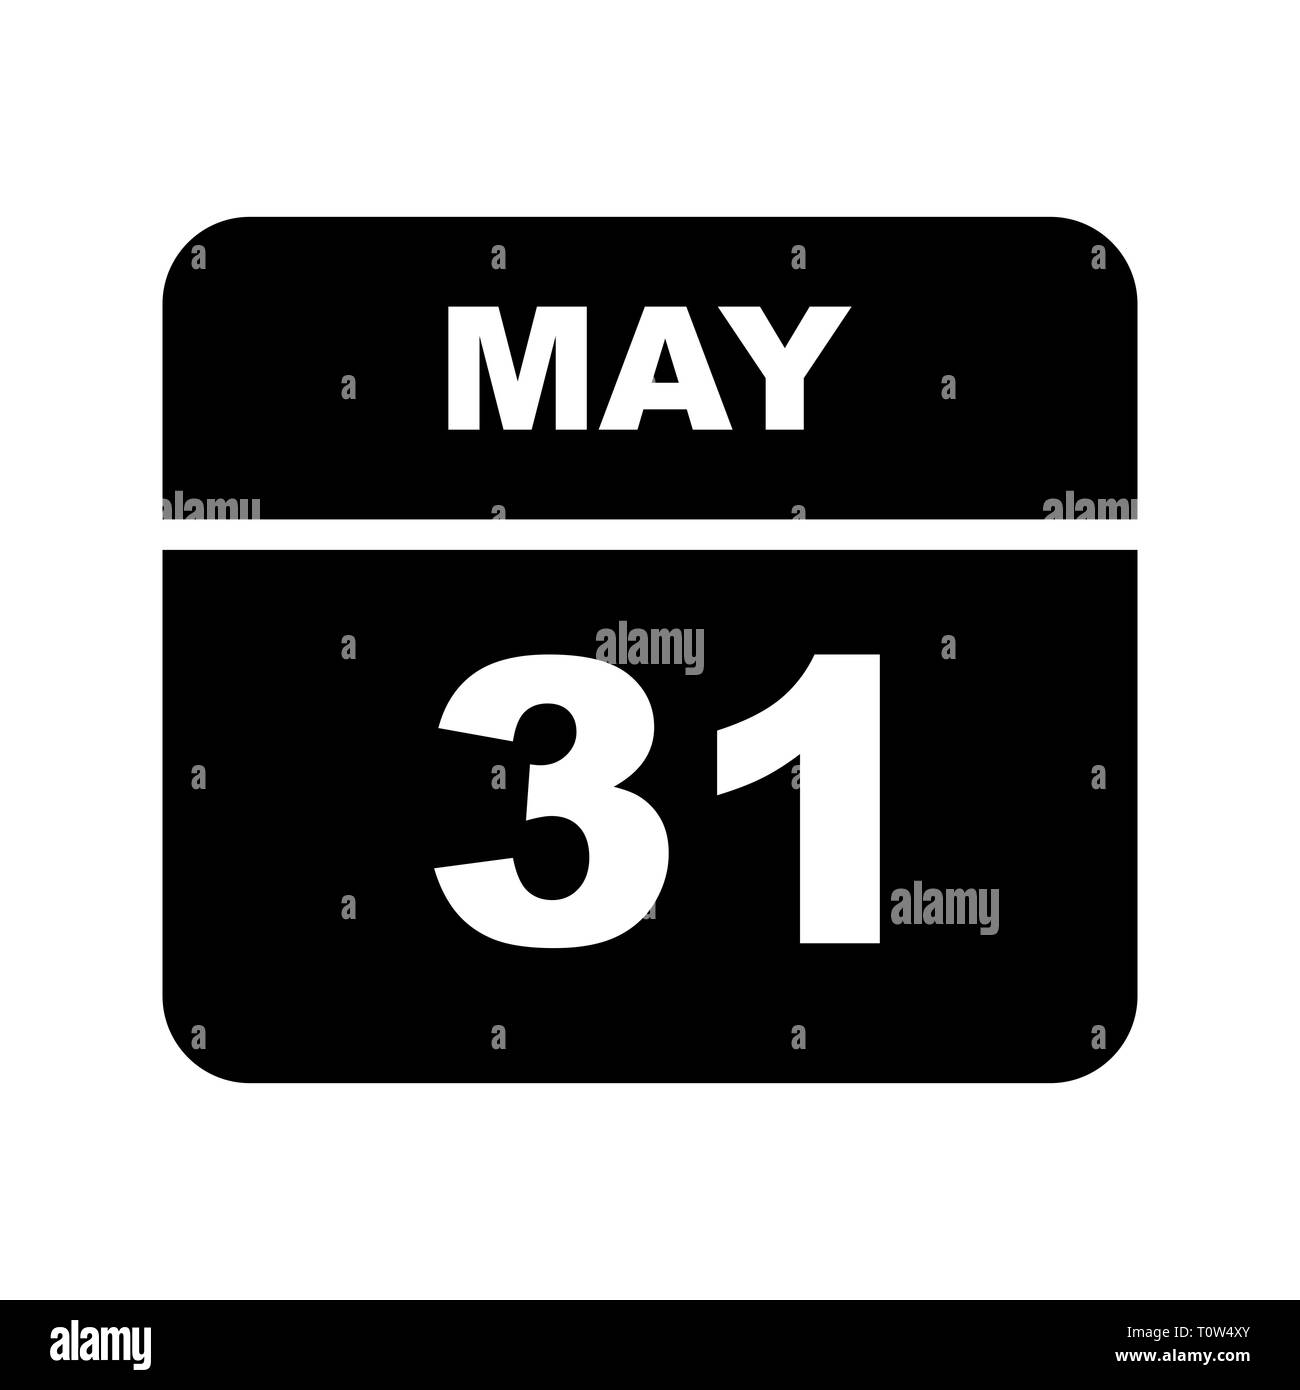 May 31st Date on a Single Day Calendar Stock Photo Alamy